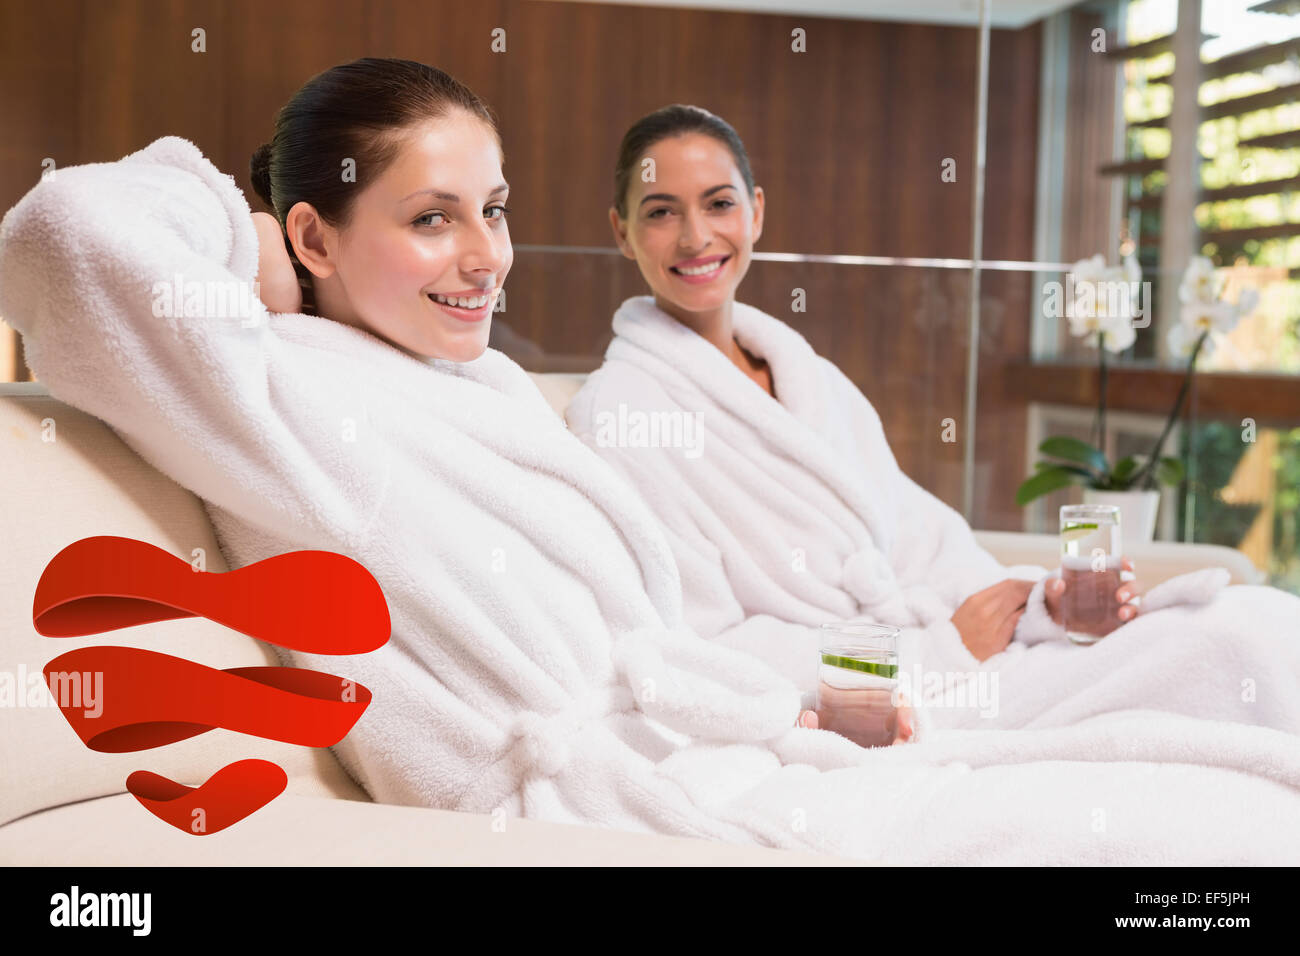 Composite image of smiling women in bathrobes sitting on couch Stock Photo